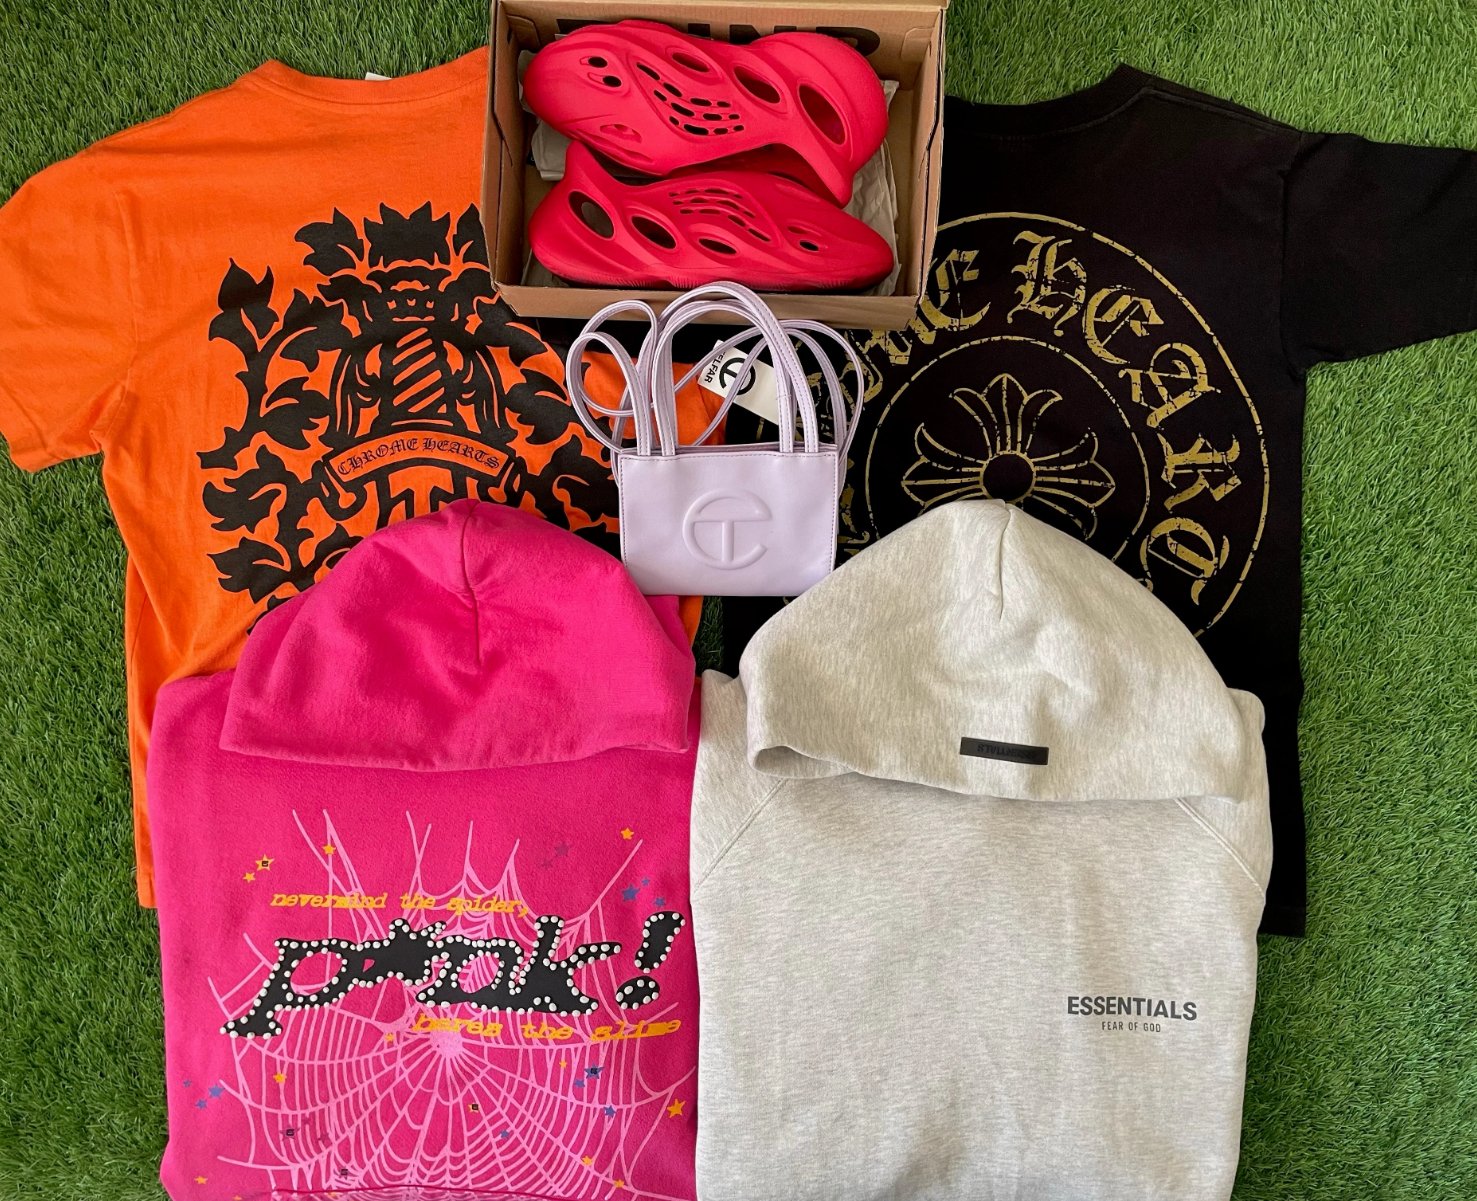 marked down elevate items. chrome hearts, sp5der p*nk, essentials, yeezy foams